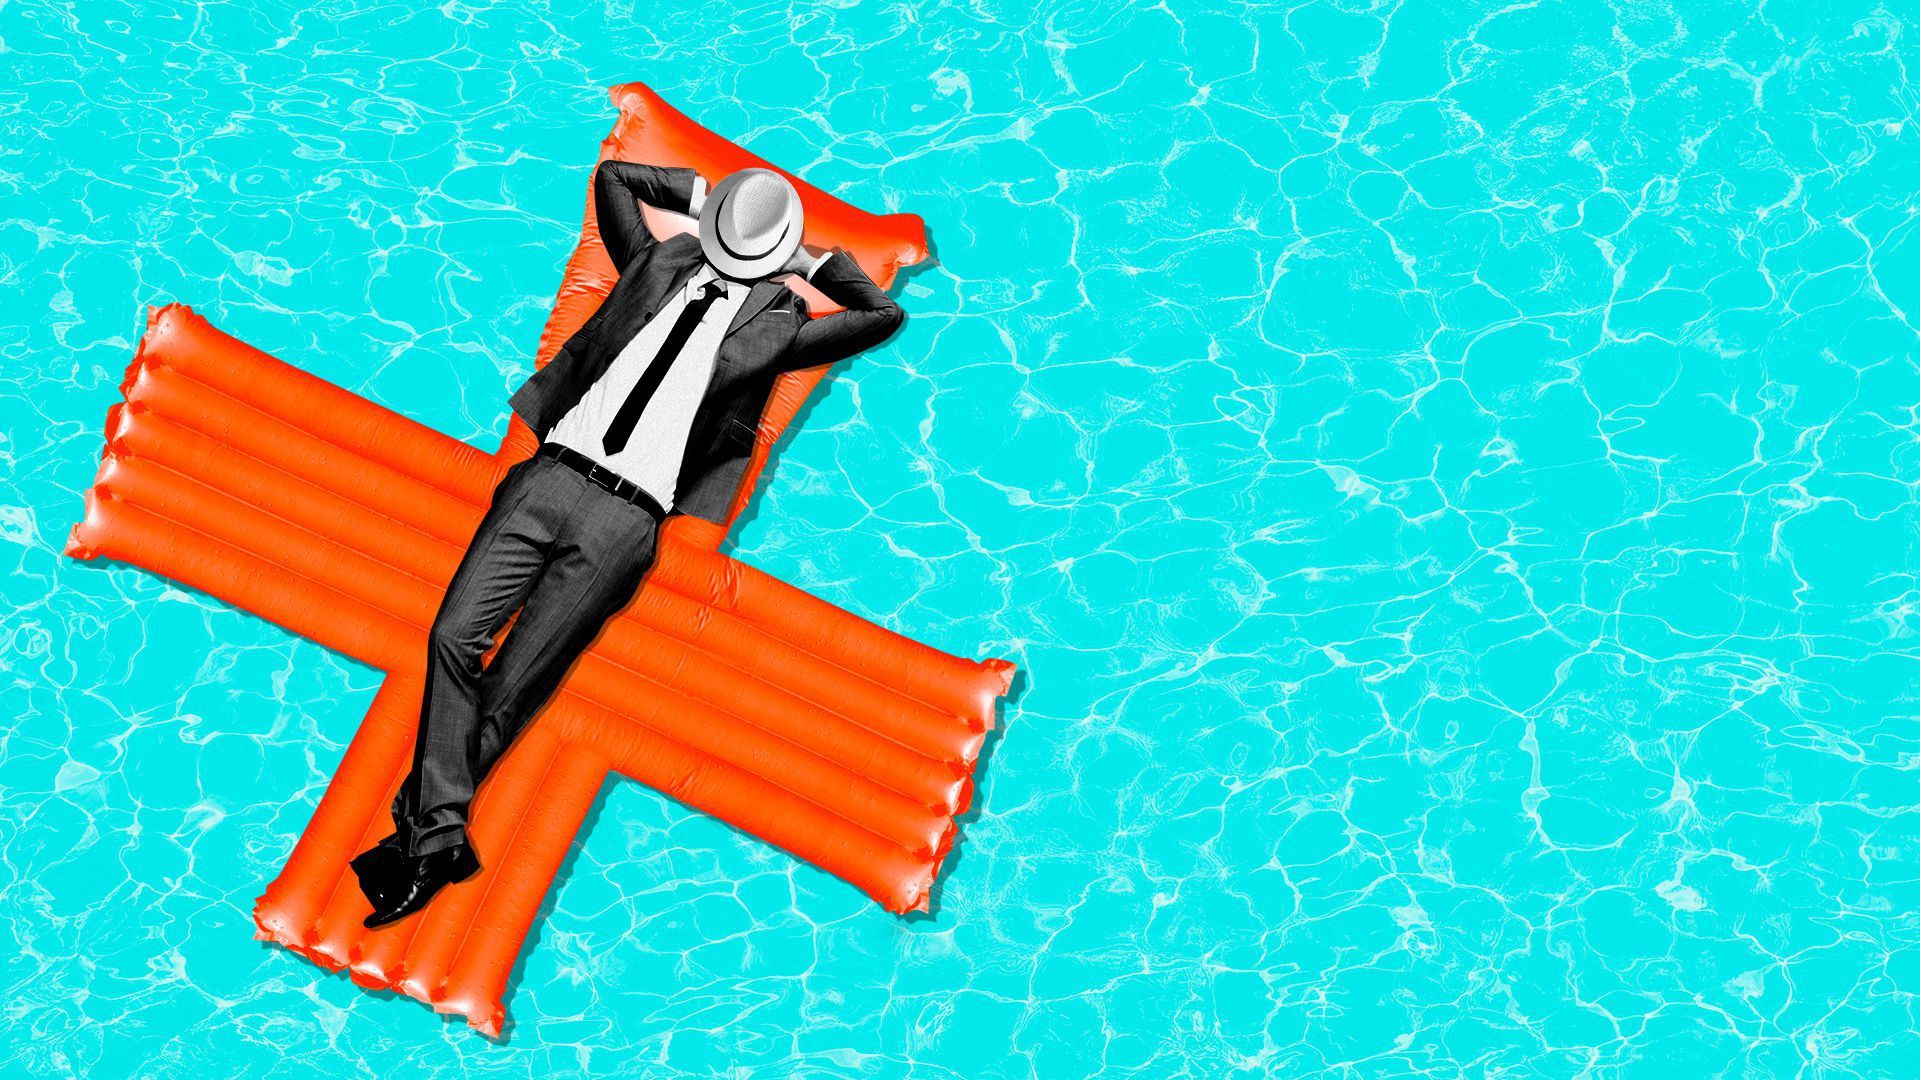 An executive relaxes on floatation devices that looks like a medical cross.